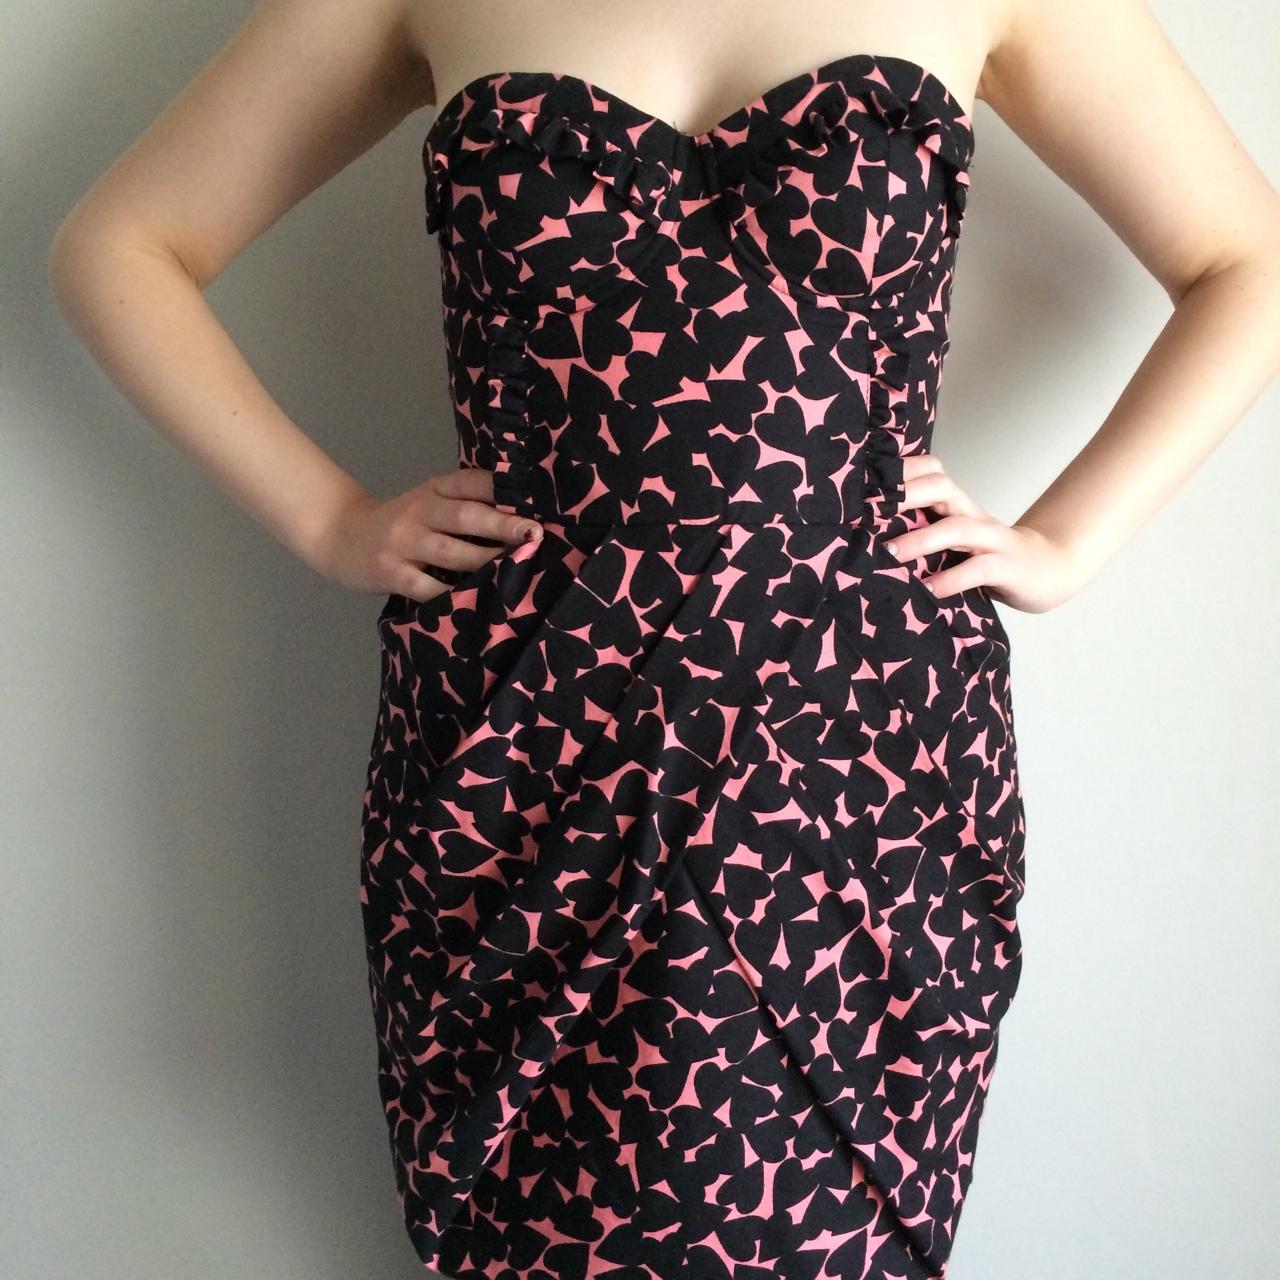 H&M Lined Strapless Pink With Black Heart Dress